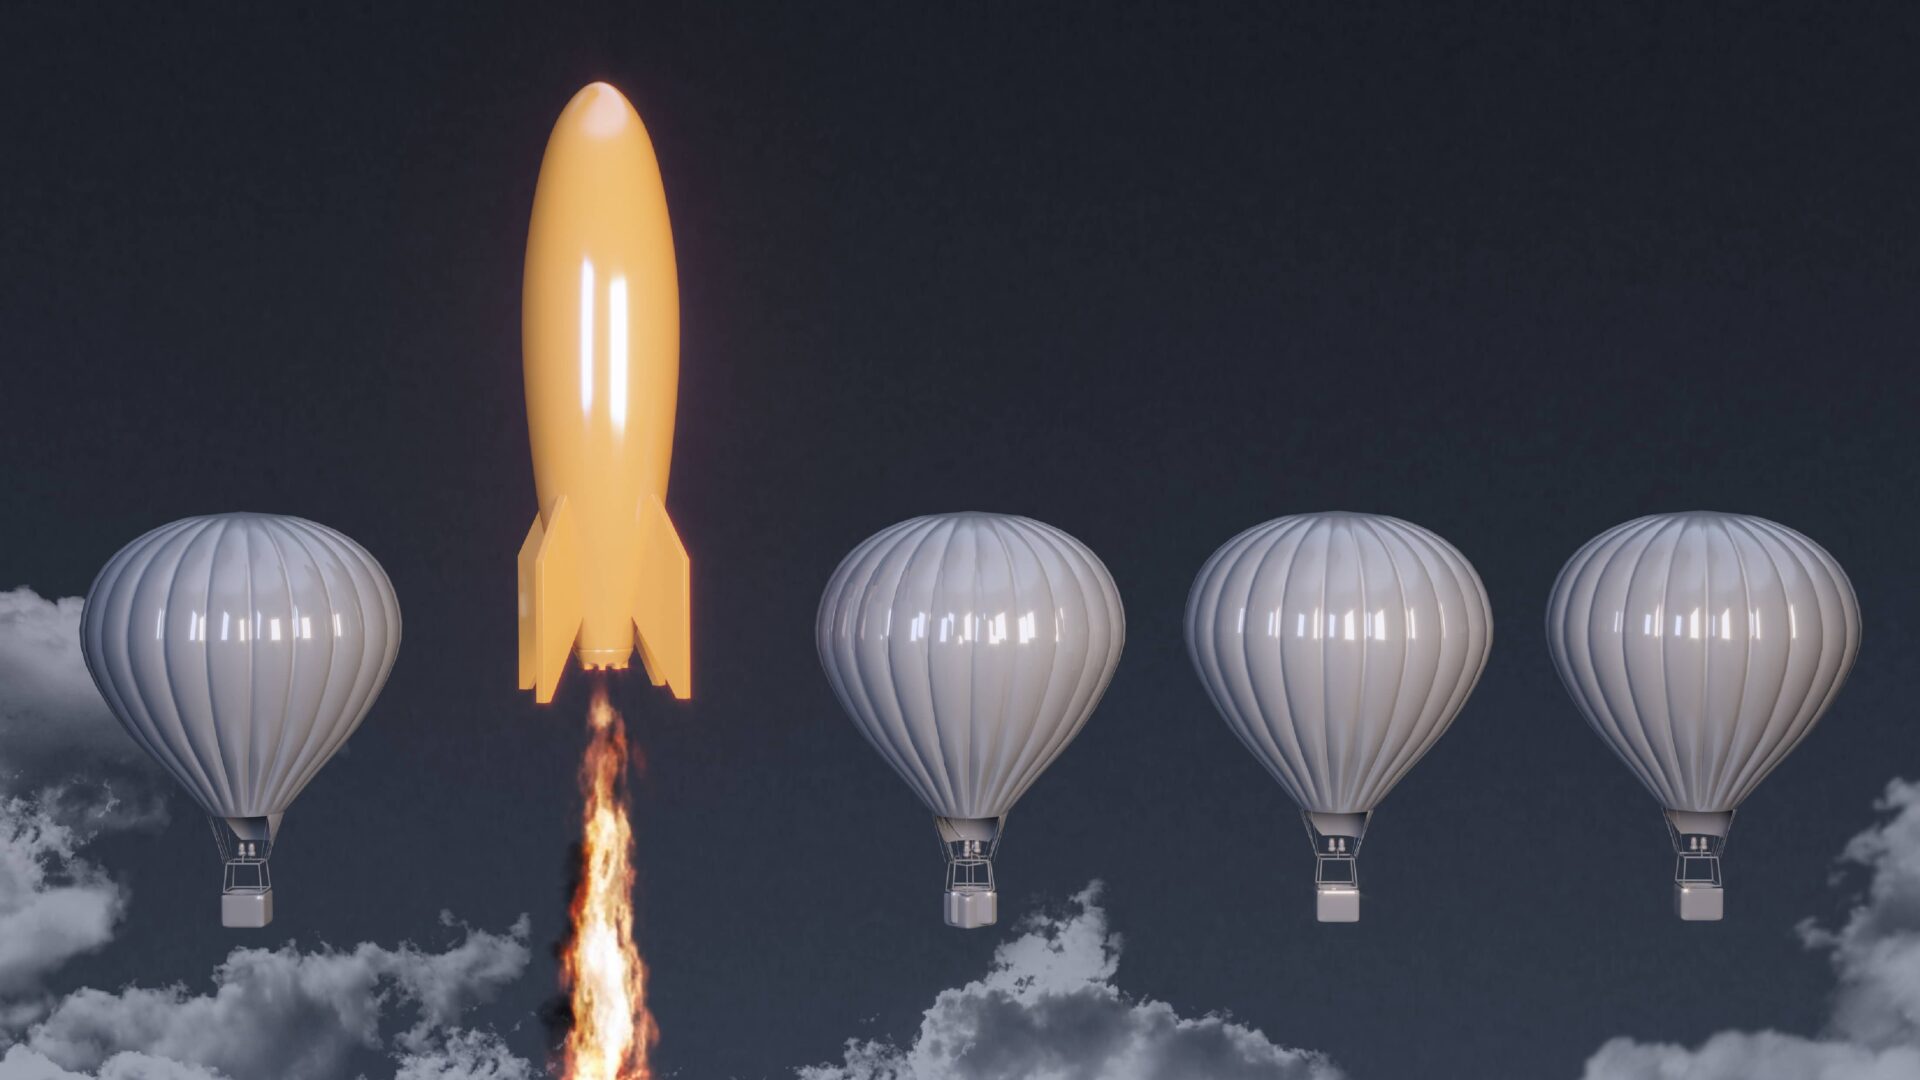 Four gray balloons and one golden rocket with exhaust beneath it